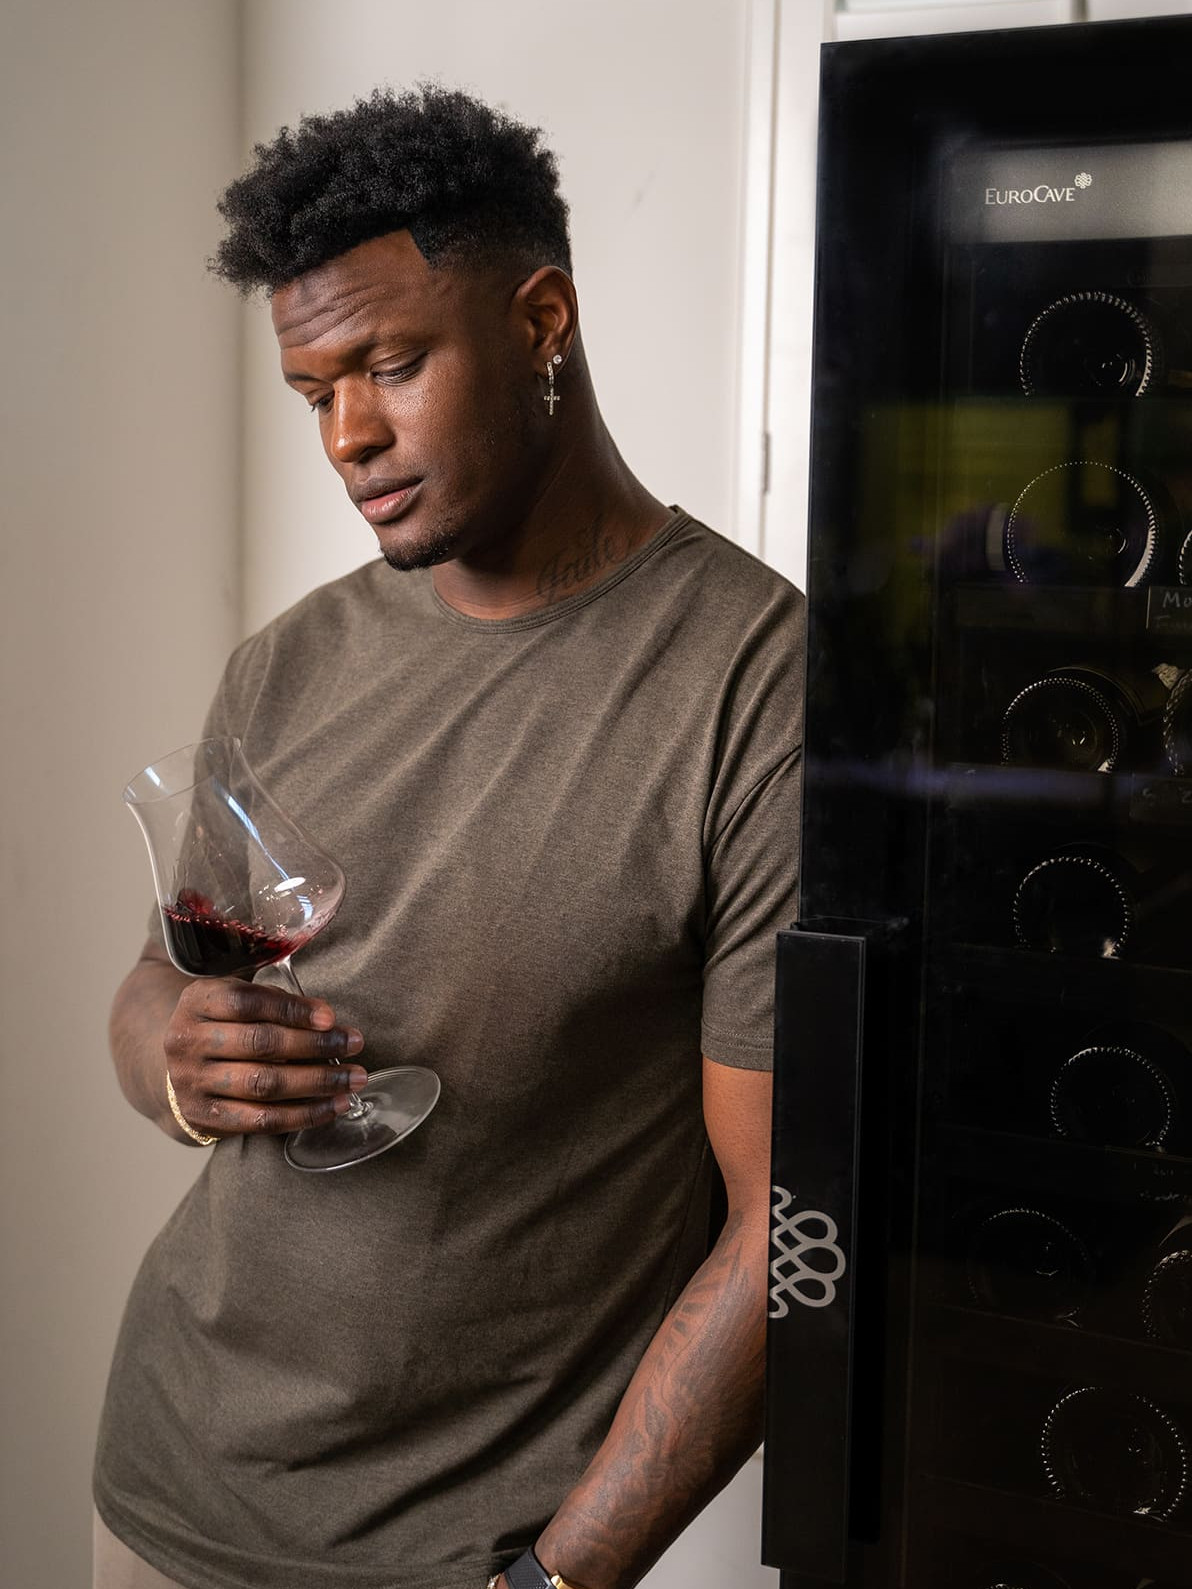 Talk with Will Blackmon - NFL Wine Guy - United States